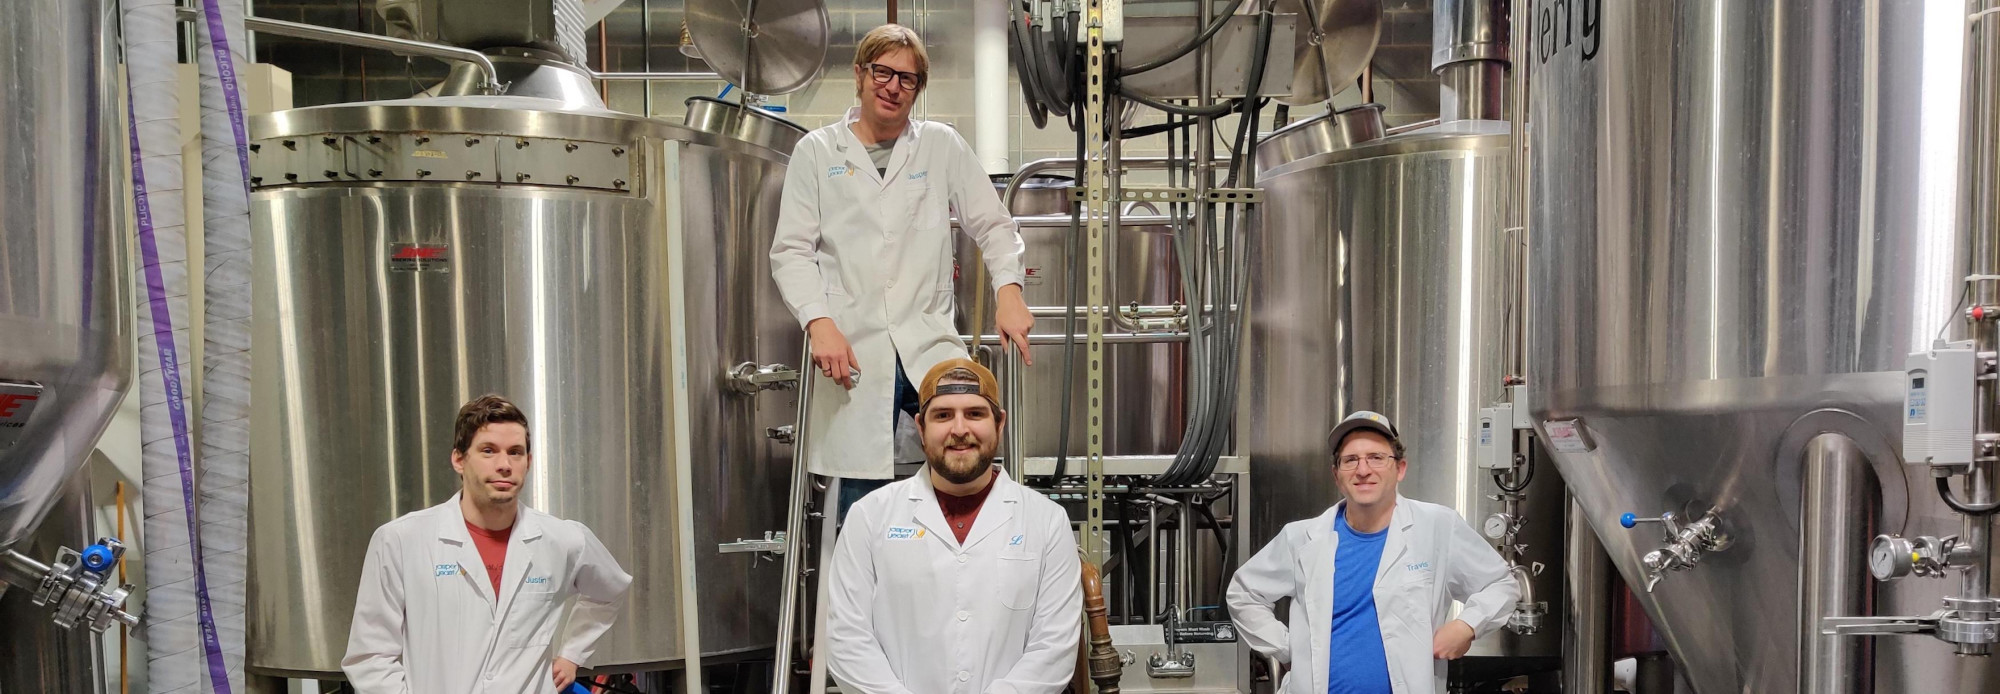 About the Jasper Yeast team members